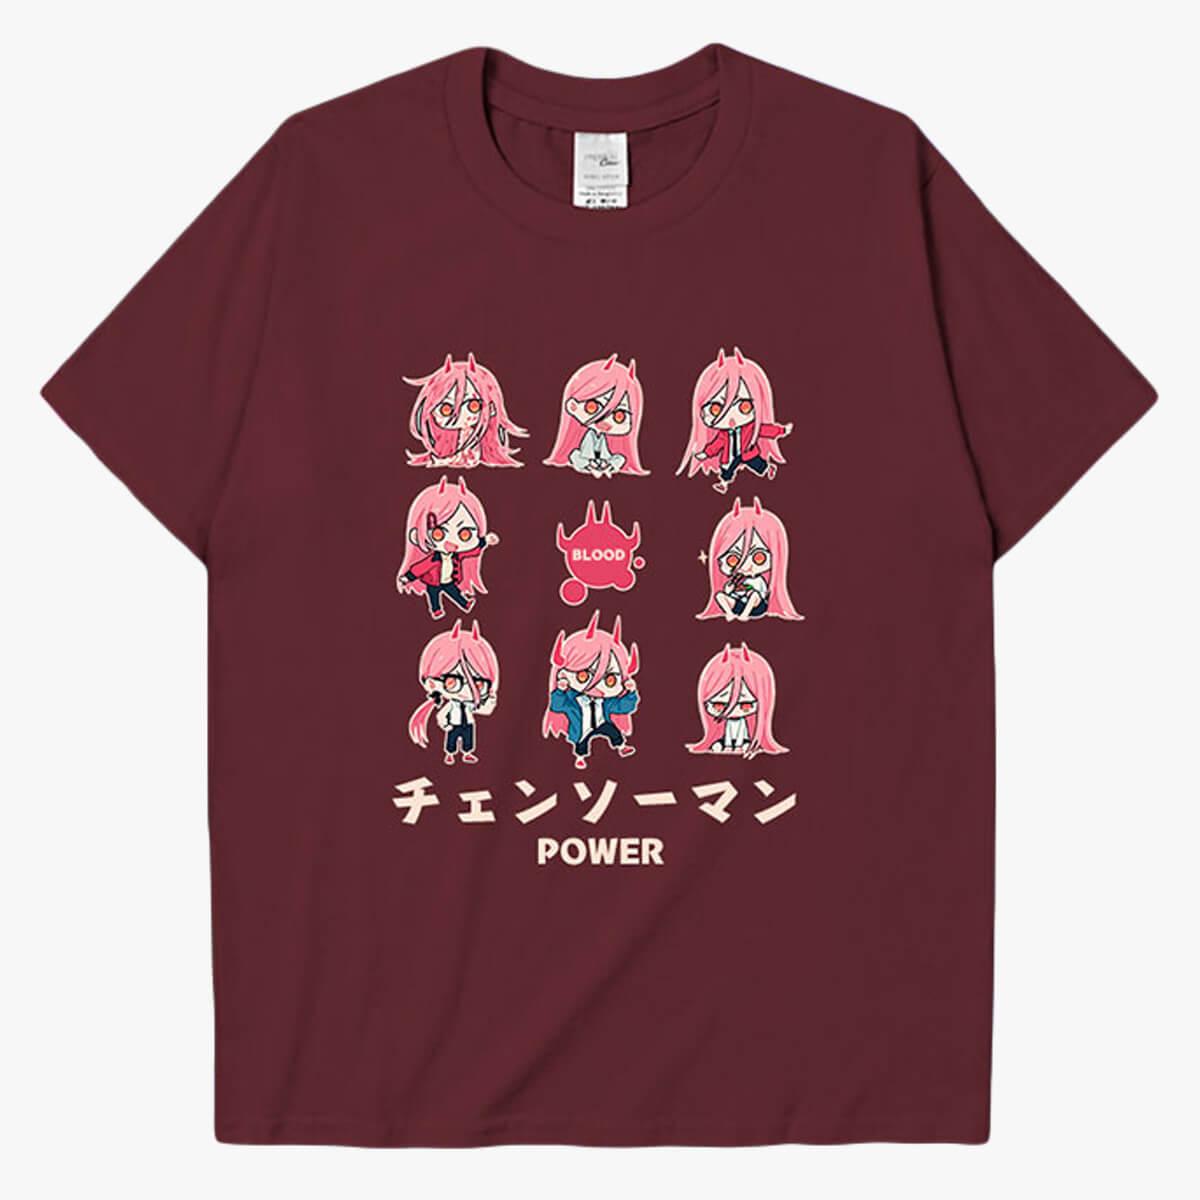 Chainsaw Man Power Chibi Aesthetic T-Shirt - Aesthetic Clothes Shop